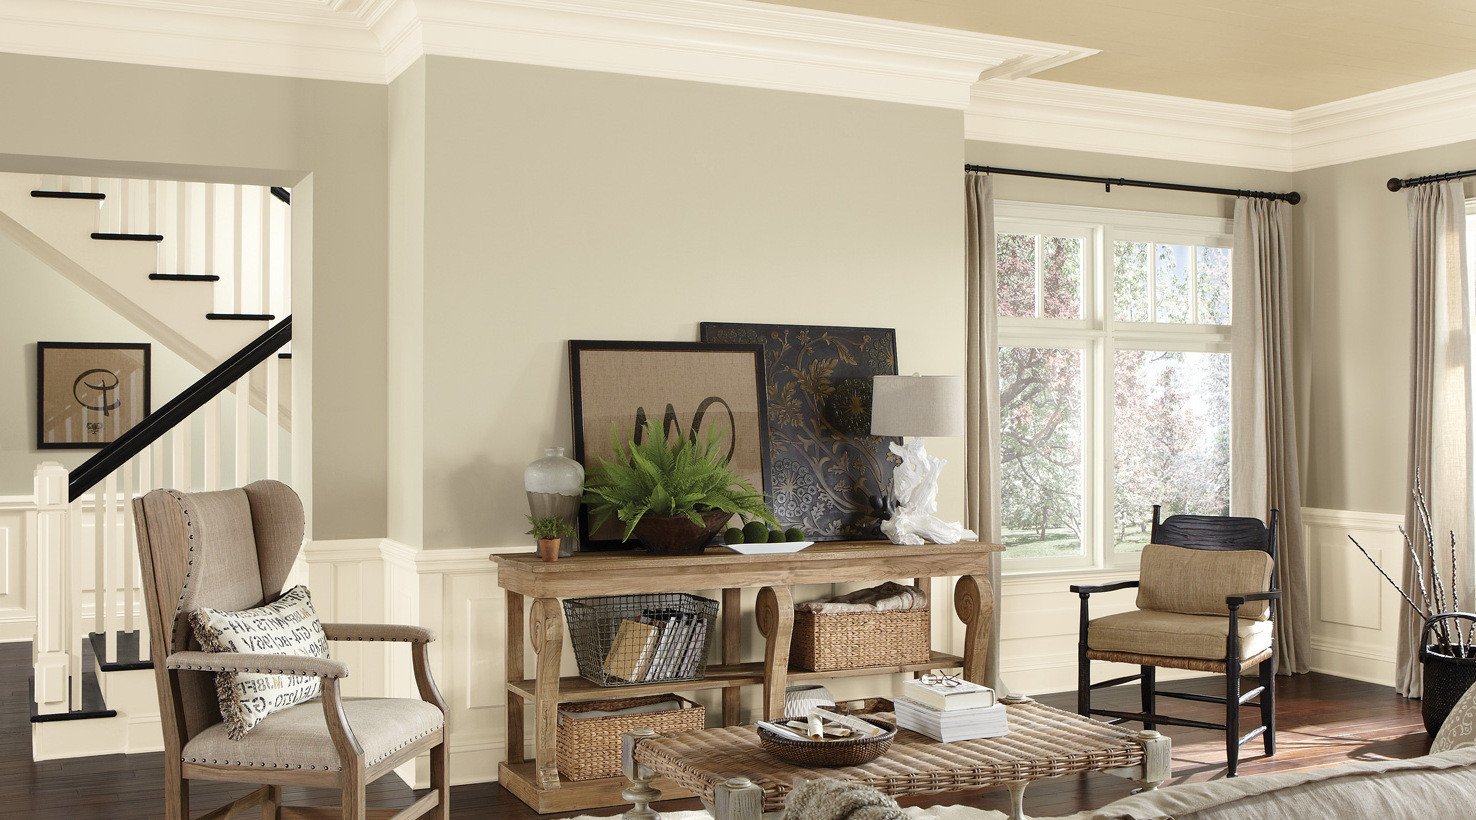 Living Room Paint Colors Pictures
 Best Paint Color for Living Room Ideas to Decorate Living